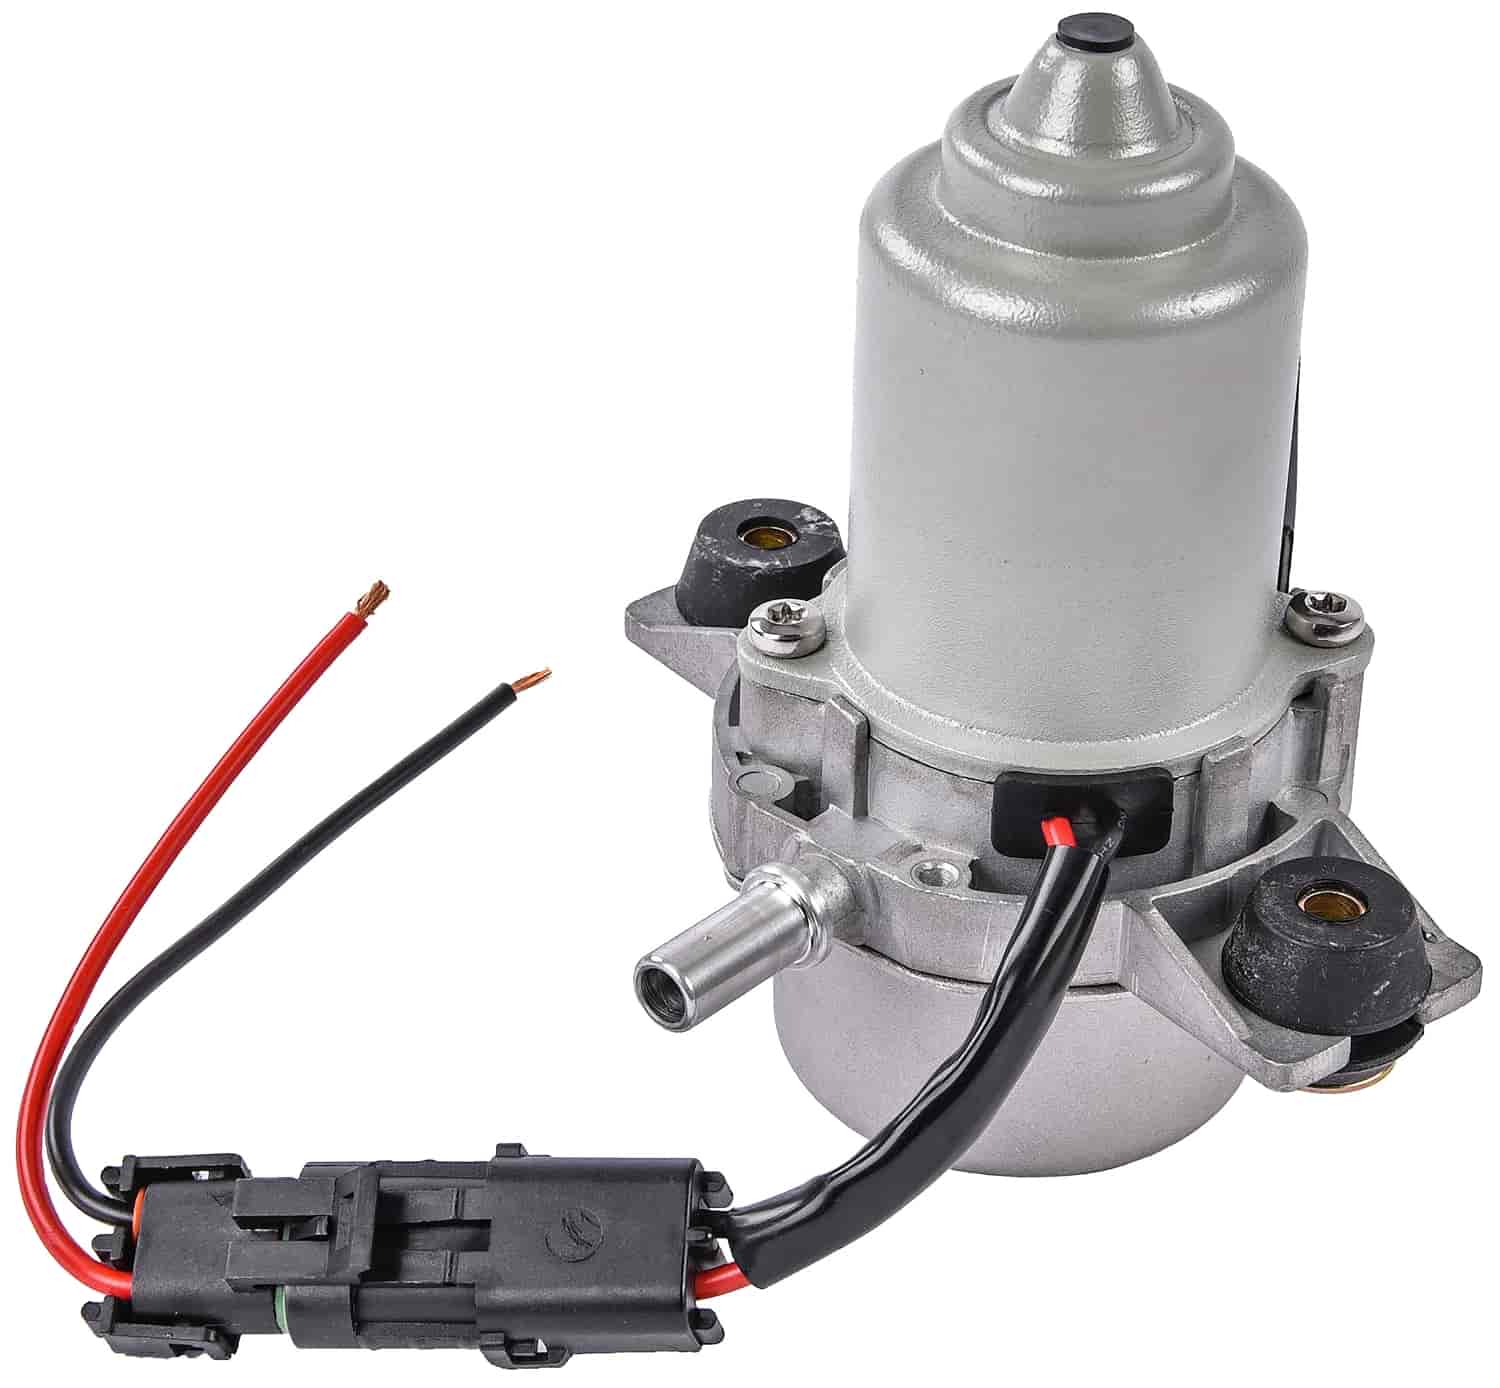 JEGS 63021: Electric Vacuum Pump Best Suited for Controlling Vacuum  Accessories such as Headlight and HVAC Actuators, Wipers and More - JEGS  High Performance